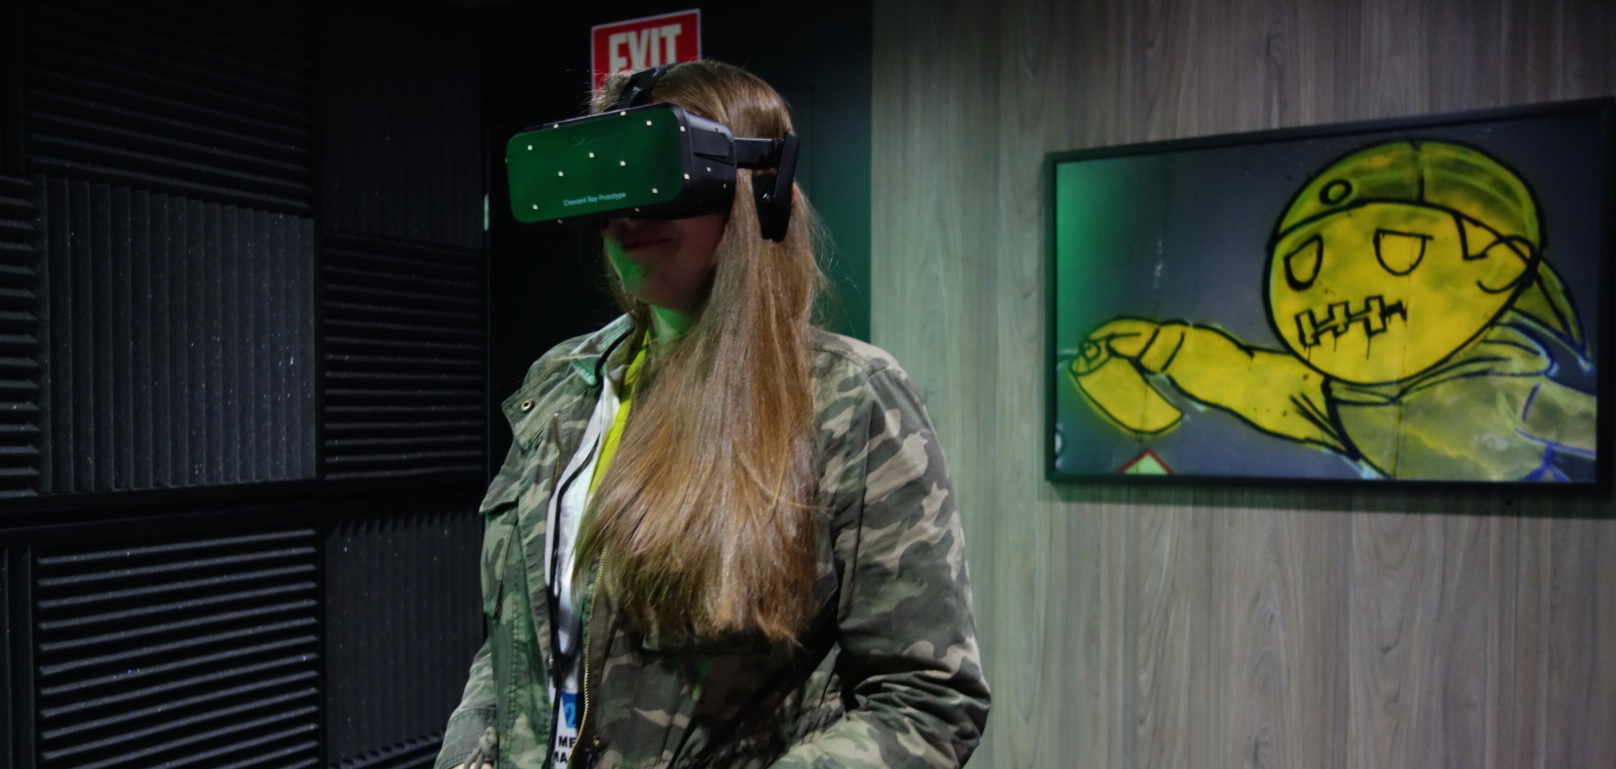 From Samsung To Razer To Oculus, Our Experience With The Latest In Virtual Reality